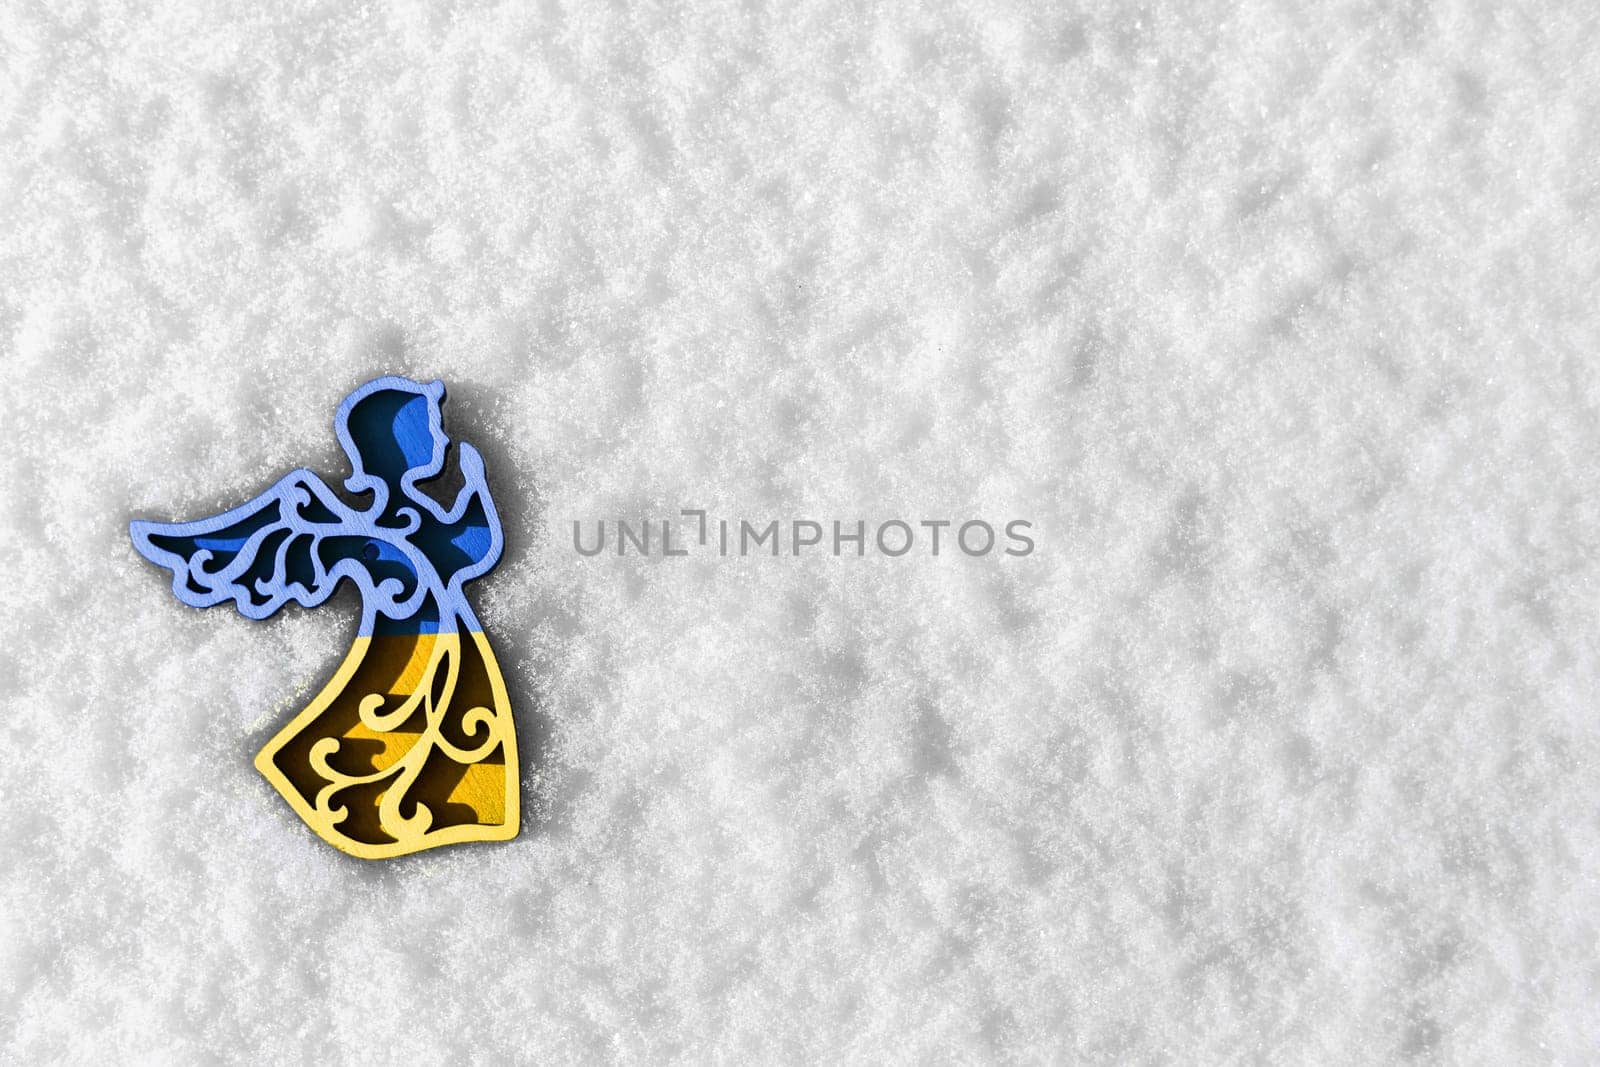 blue and yellow toy angel on white snow by alexxndr